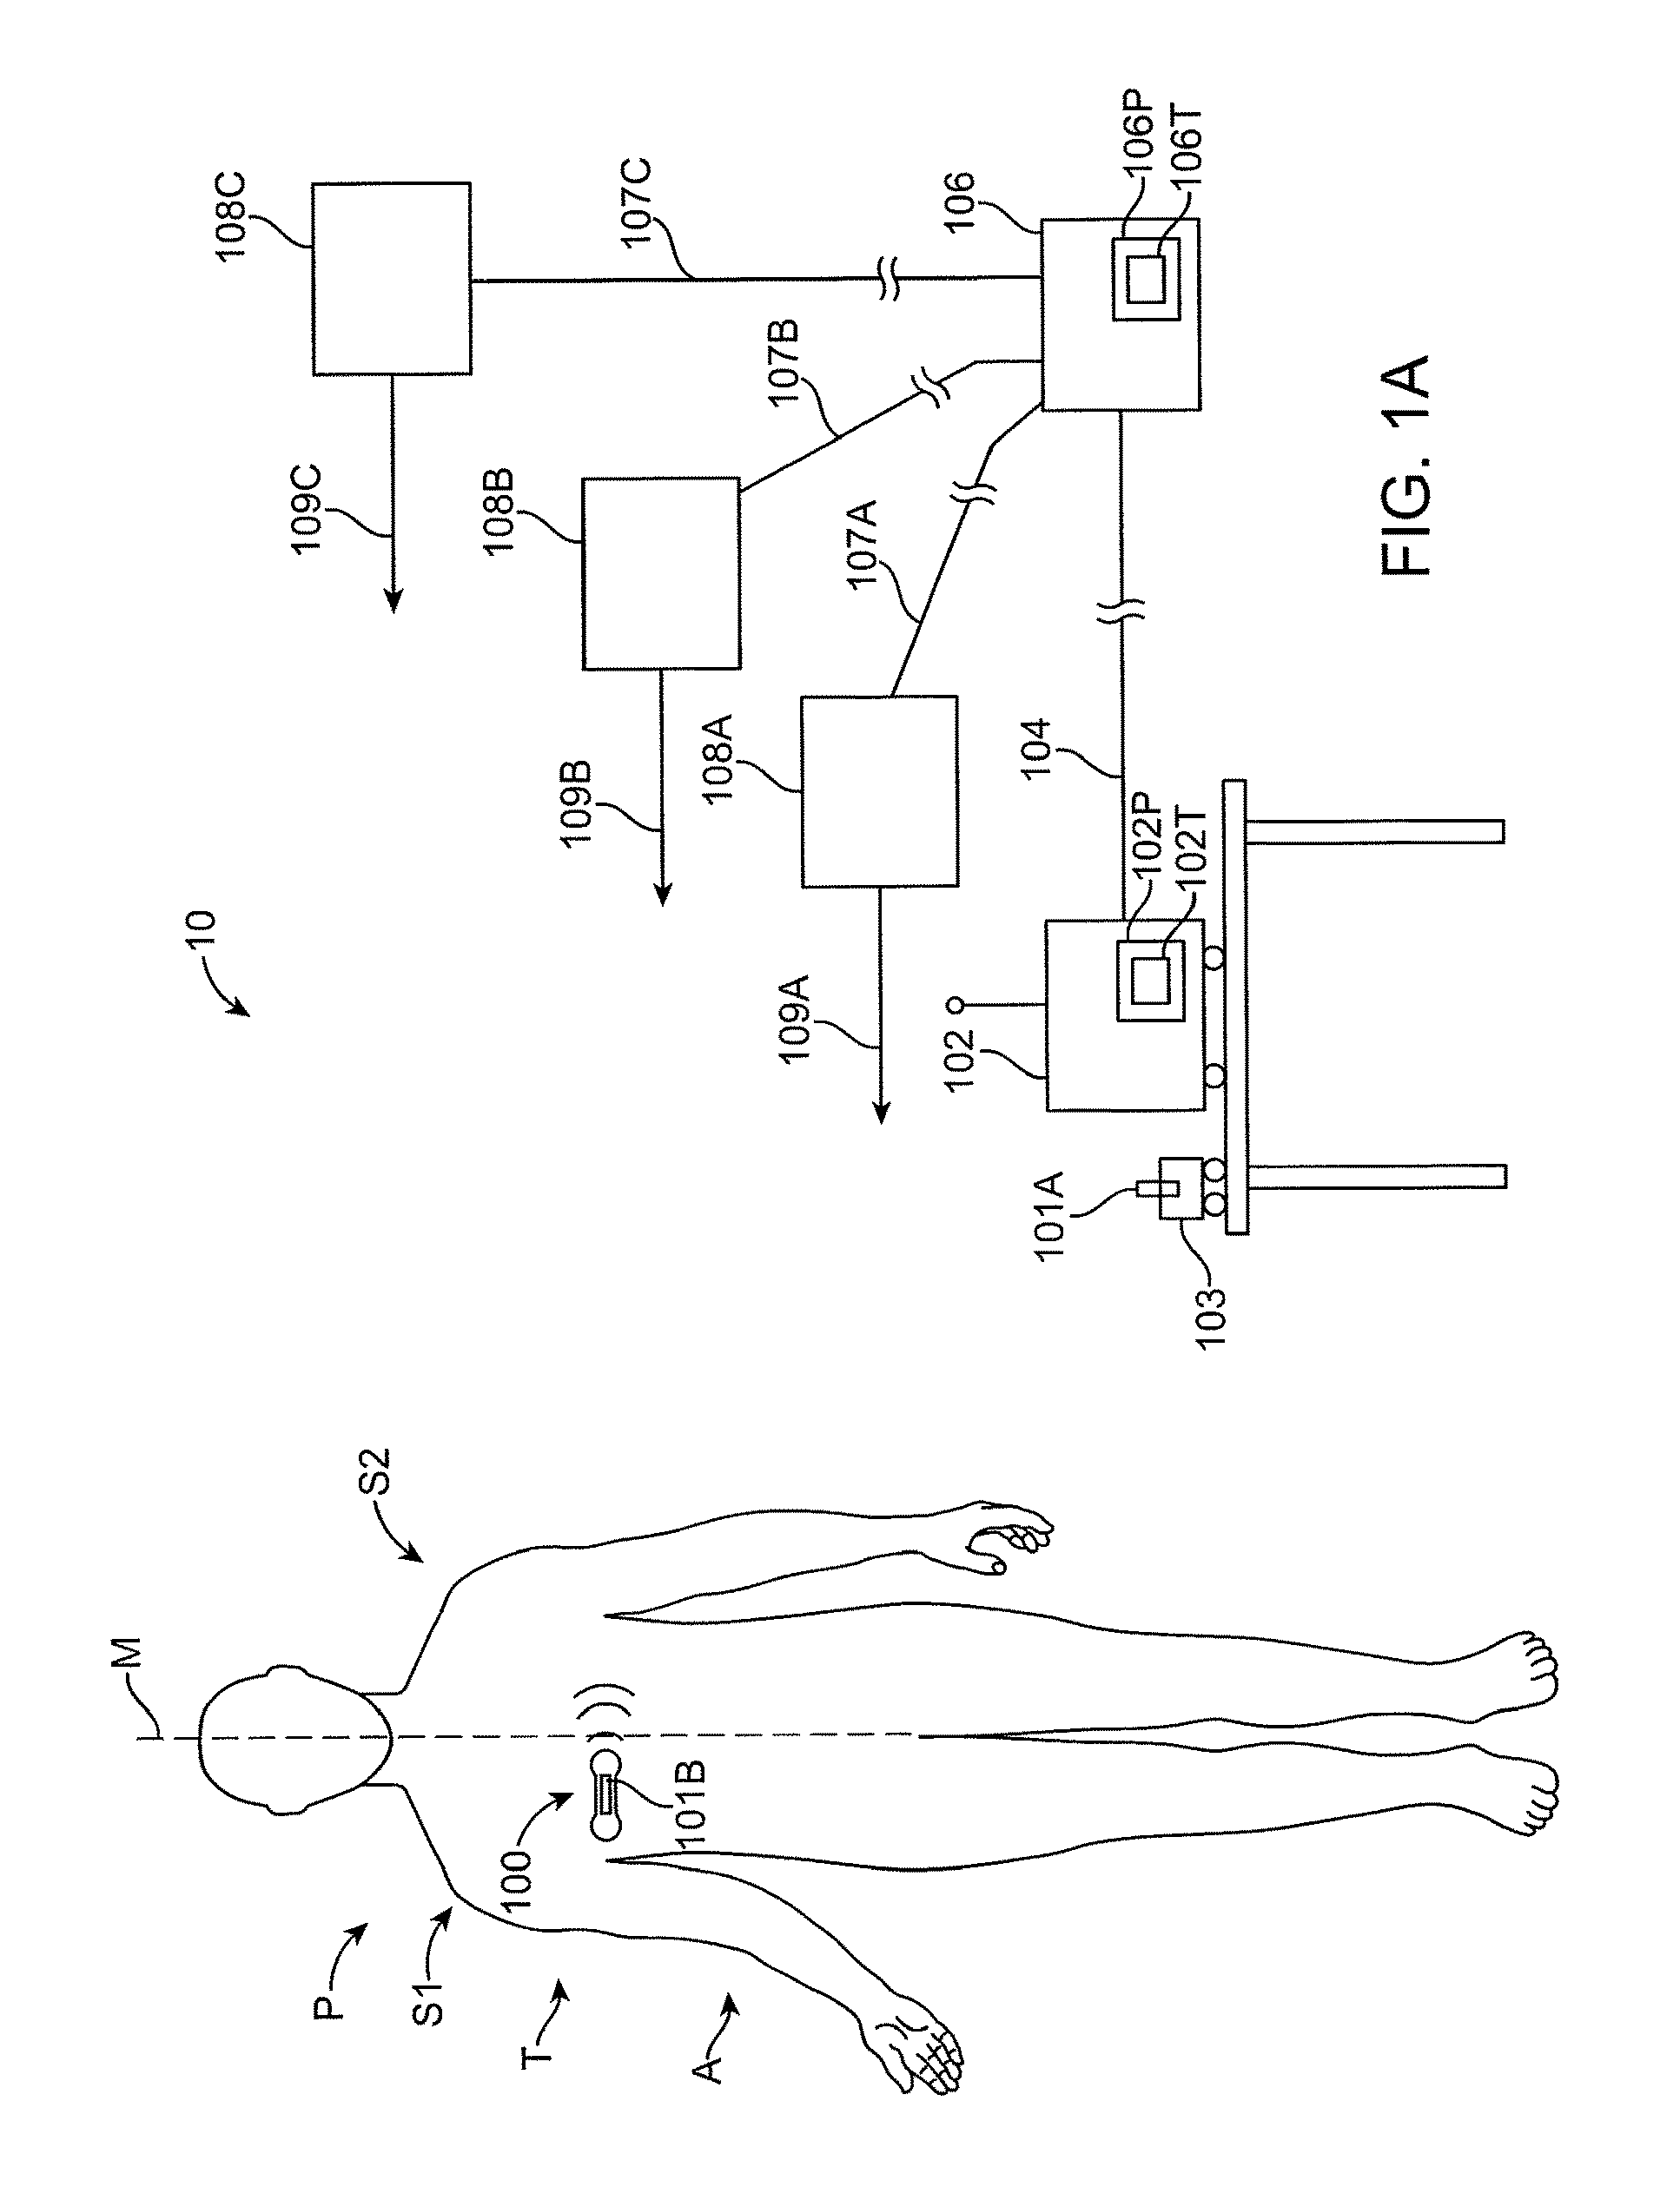 Method and apparatus for remote detection and monitoring of functional chronotropic incompetence